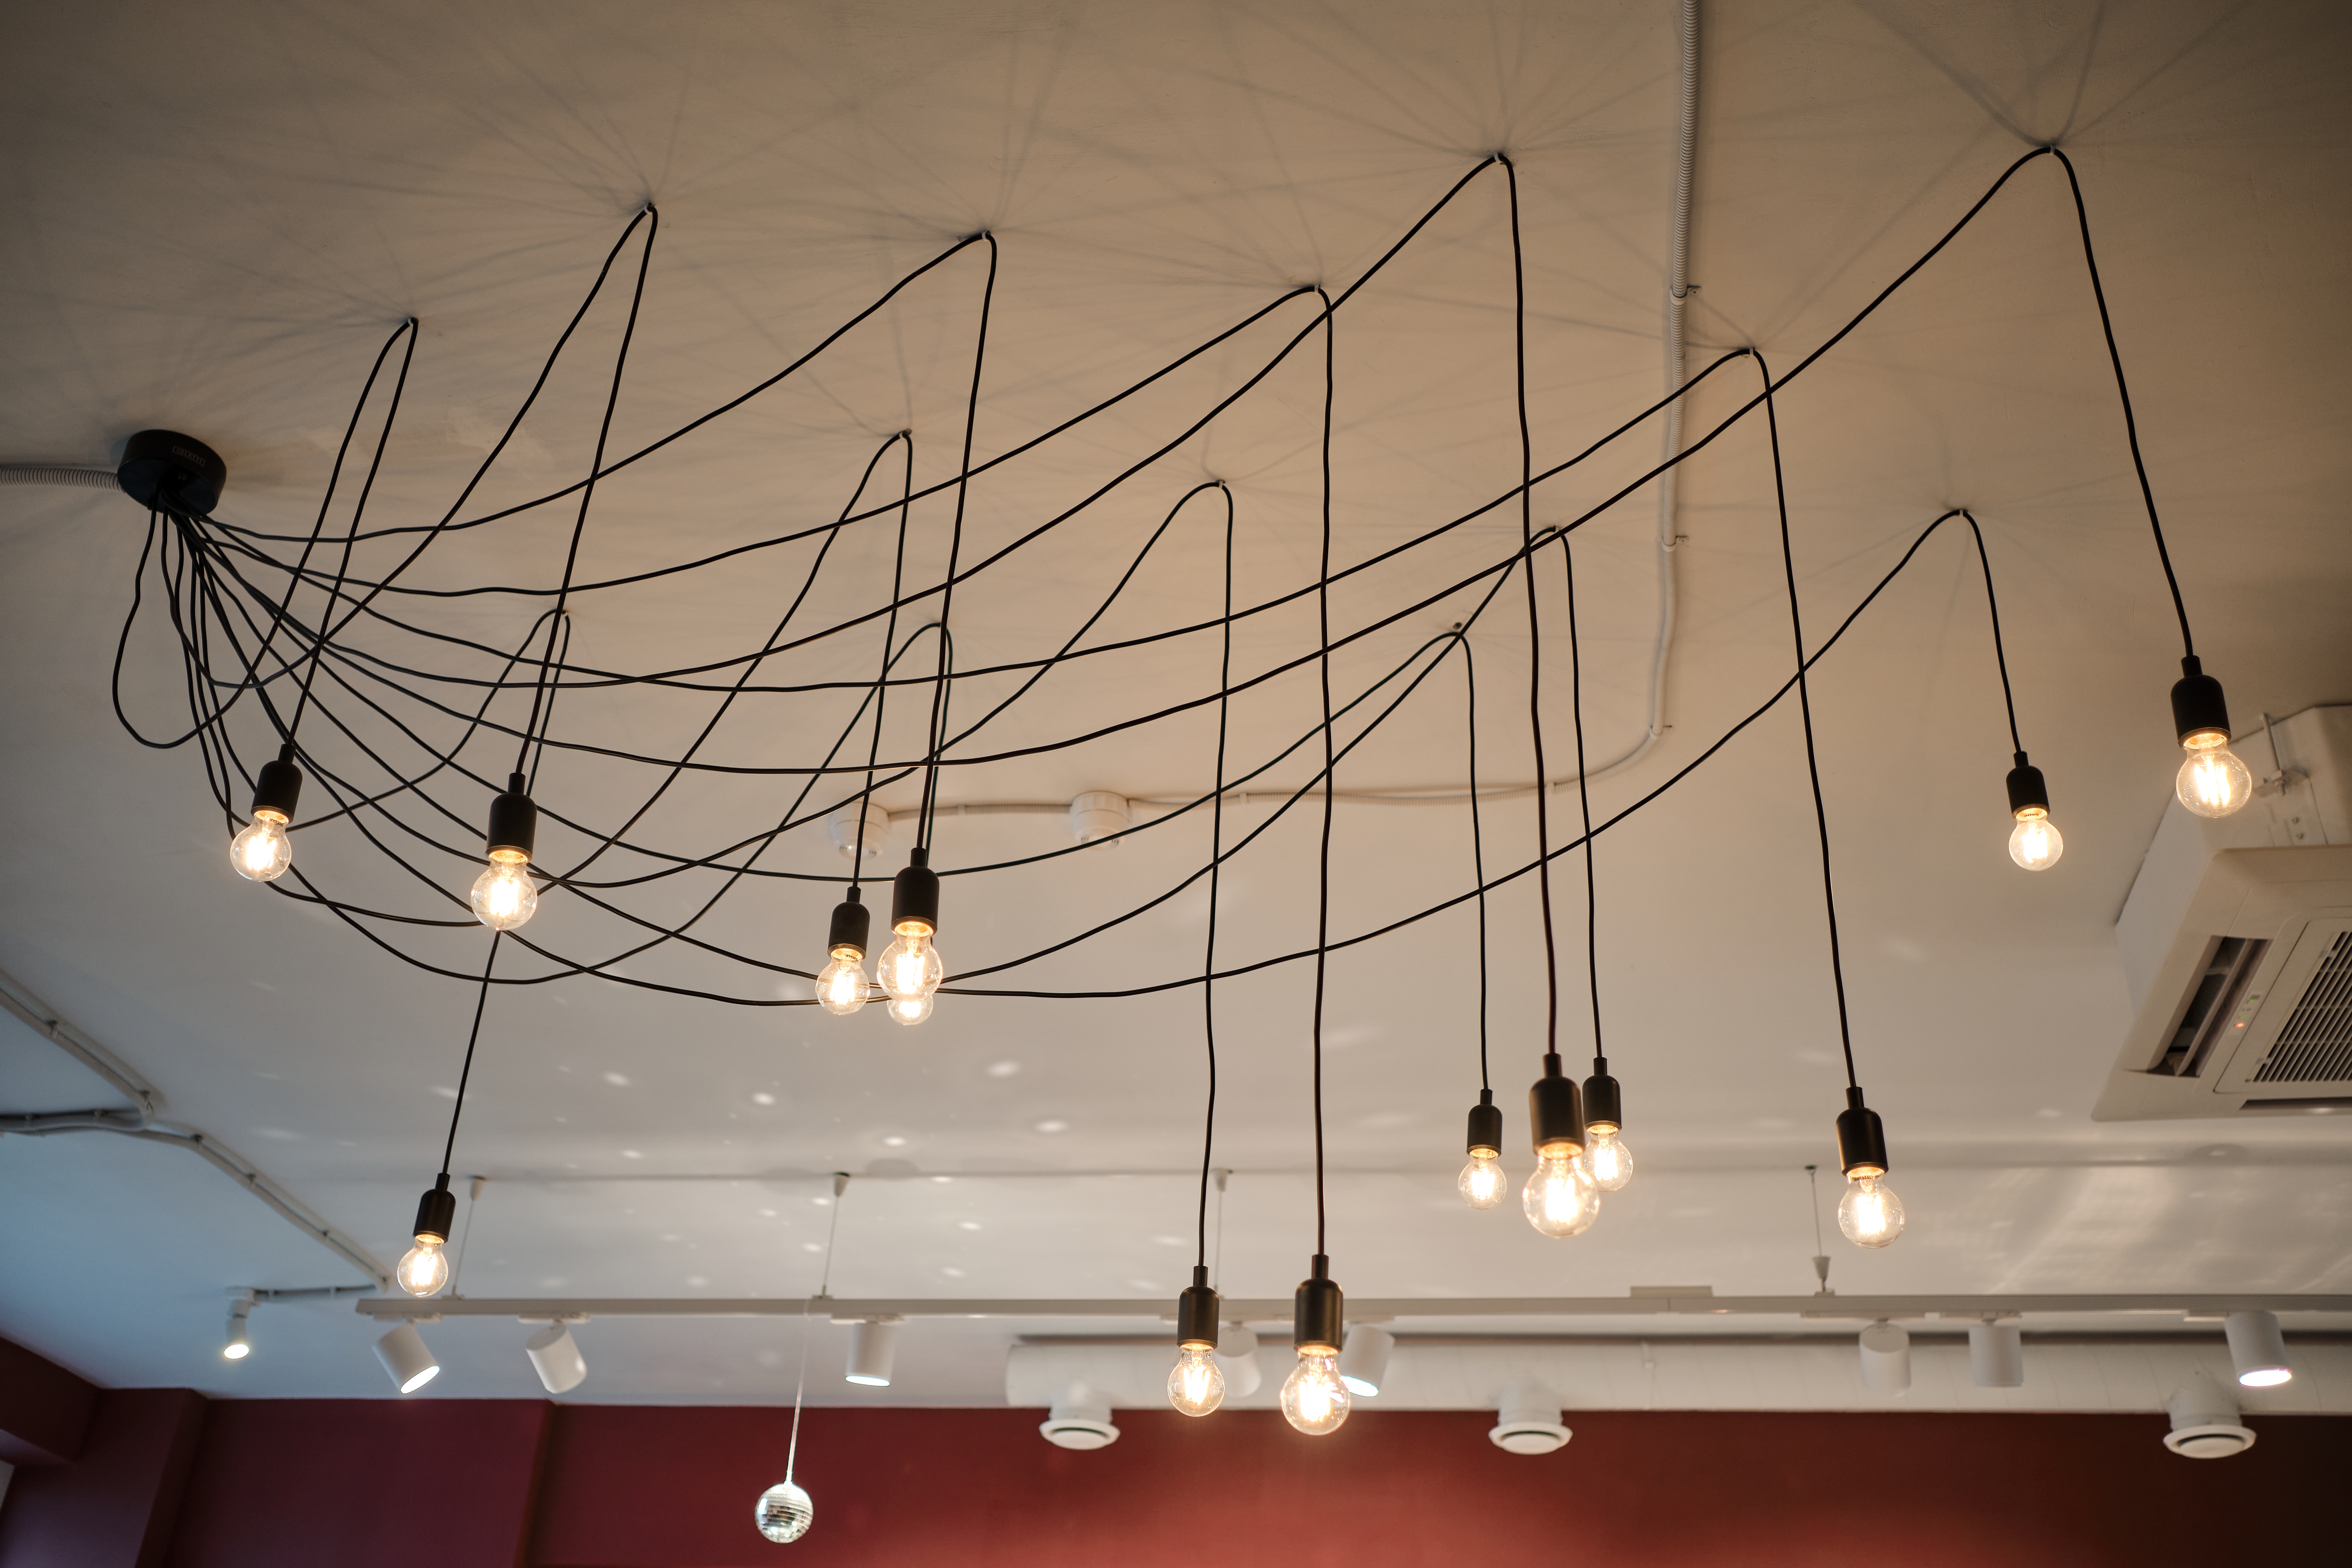 Unusual chandelier with individual light bulbs adorns ceiling in cozy cafe. Lamps illuminate large